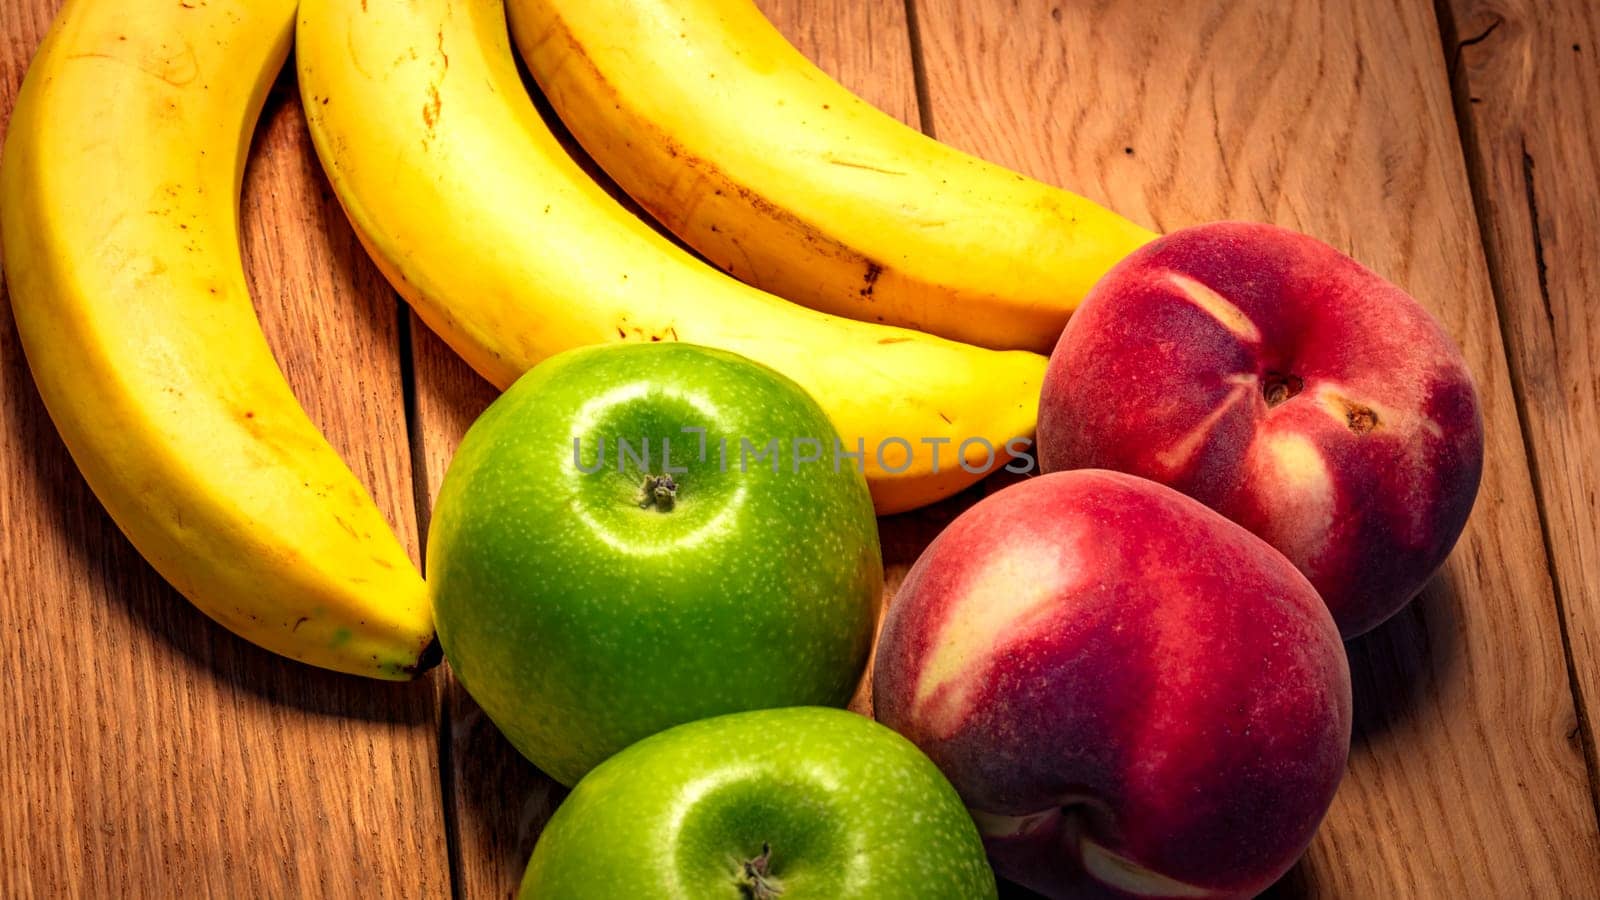 Apple, peach and bananas on a wooden board. Composition of healty fruits. by vladispas